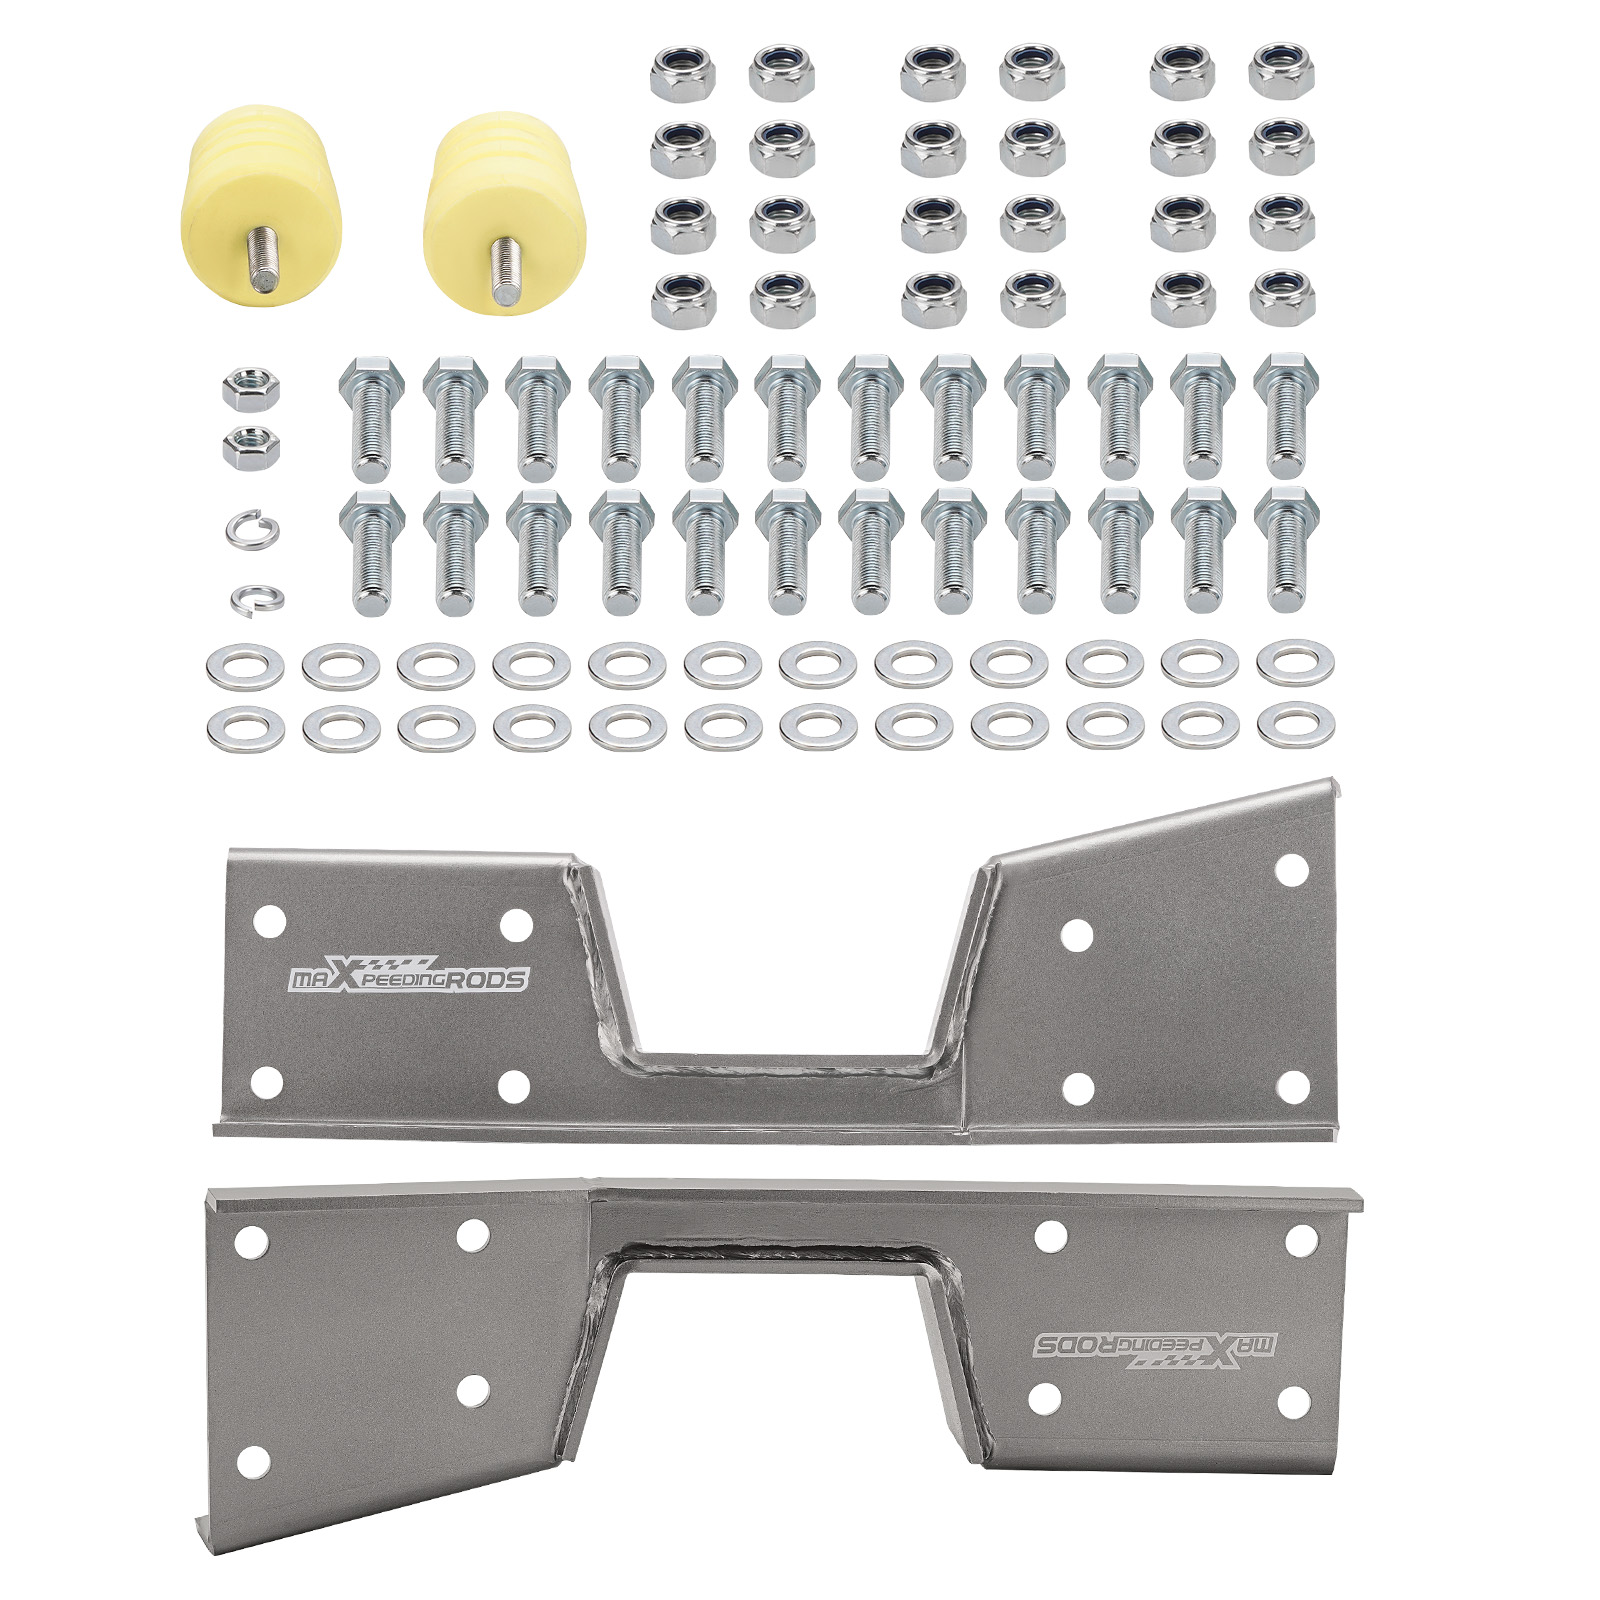 rear c-notch kit bump stops compatible for gmc sierra 1500 classic nbs body 2001-2007